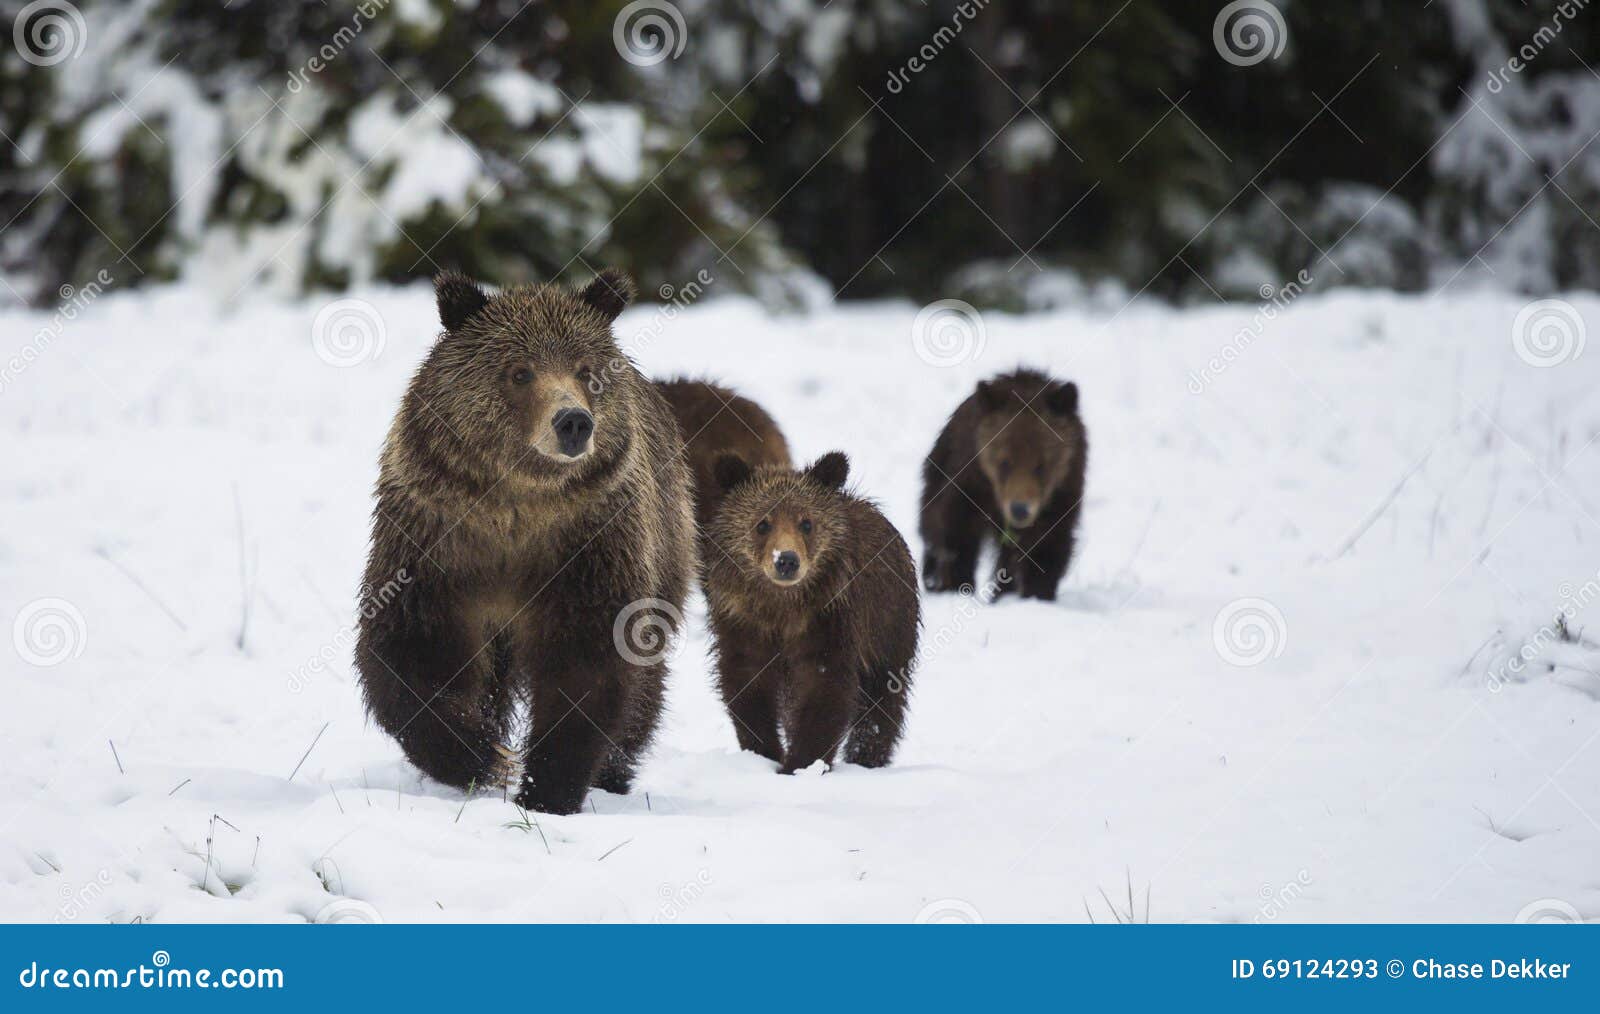 Grizzly Bear In Yellowstone National Park Royalty-Free Stock ...